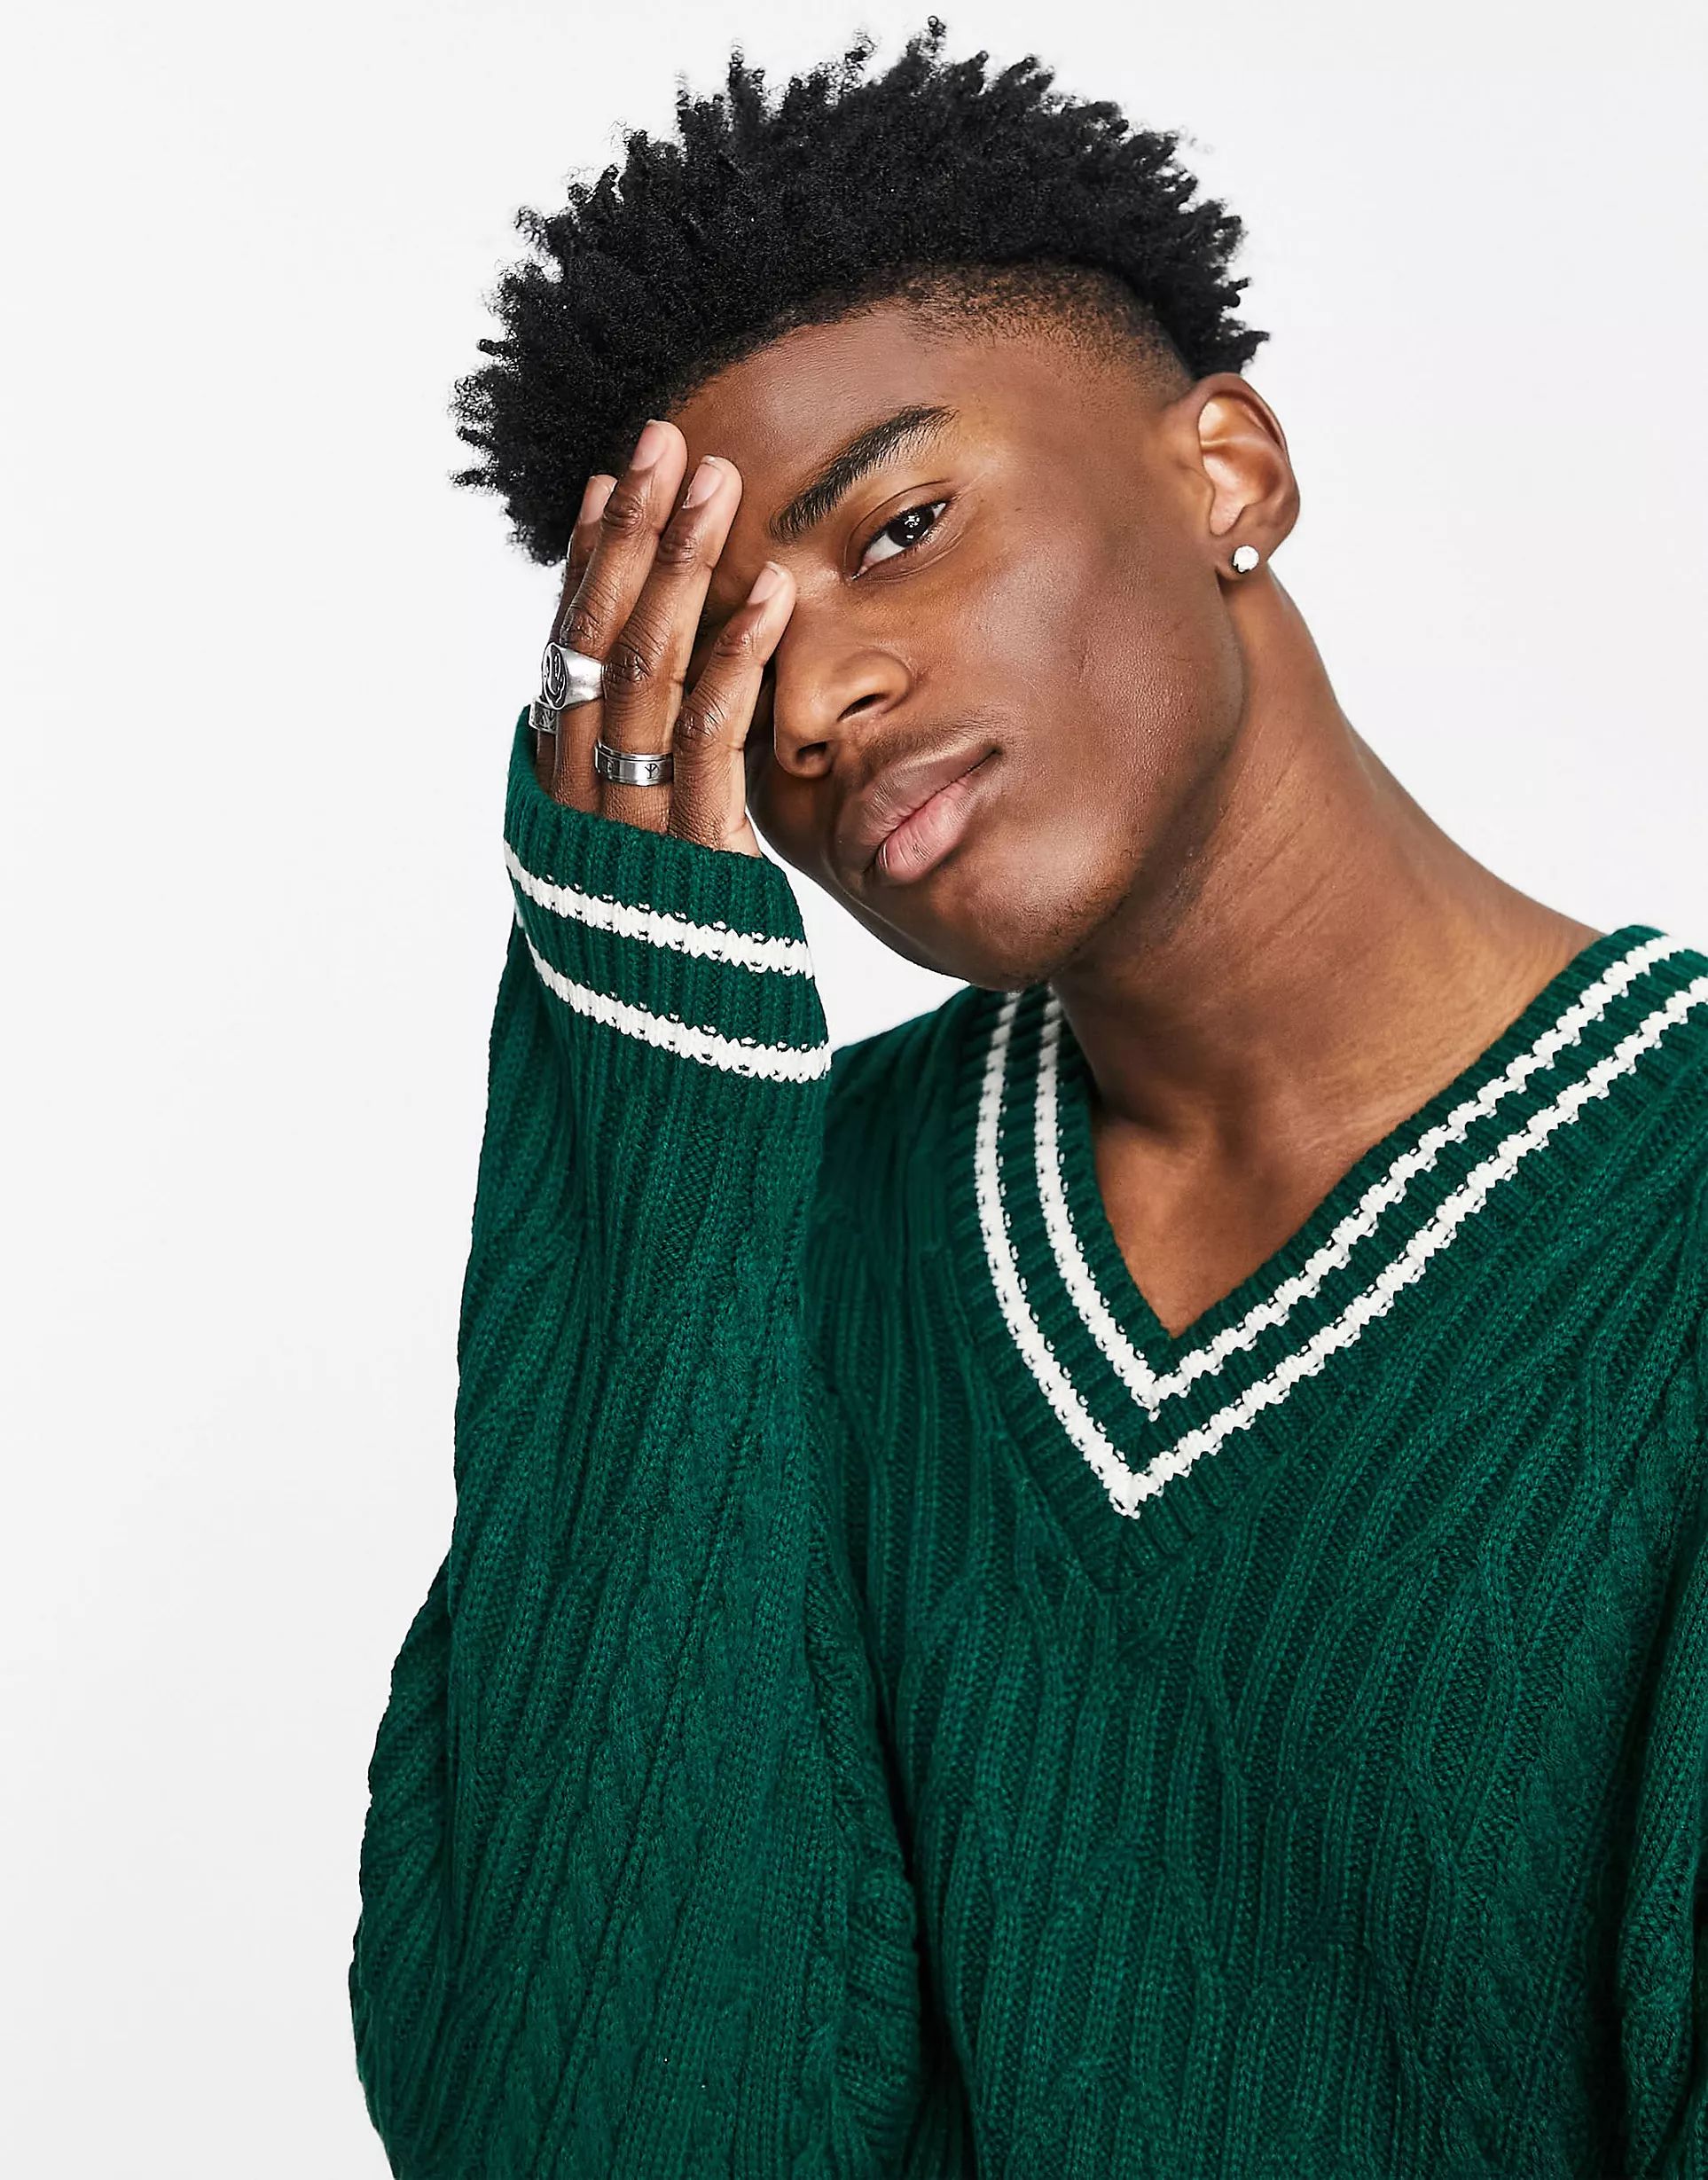 ASOS DESIGN cable knit cricket sweater in bottle green | ASOS (Global)